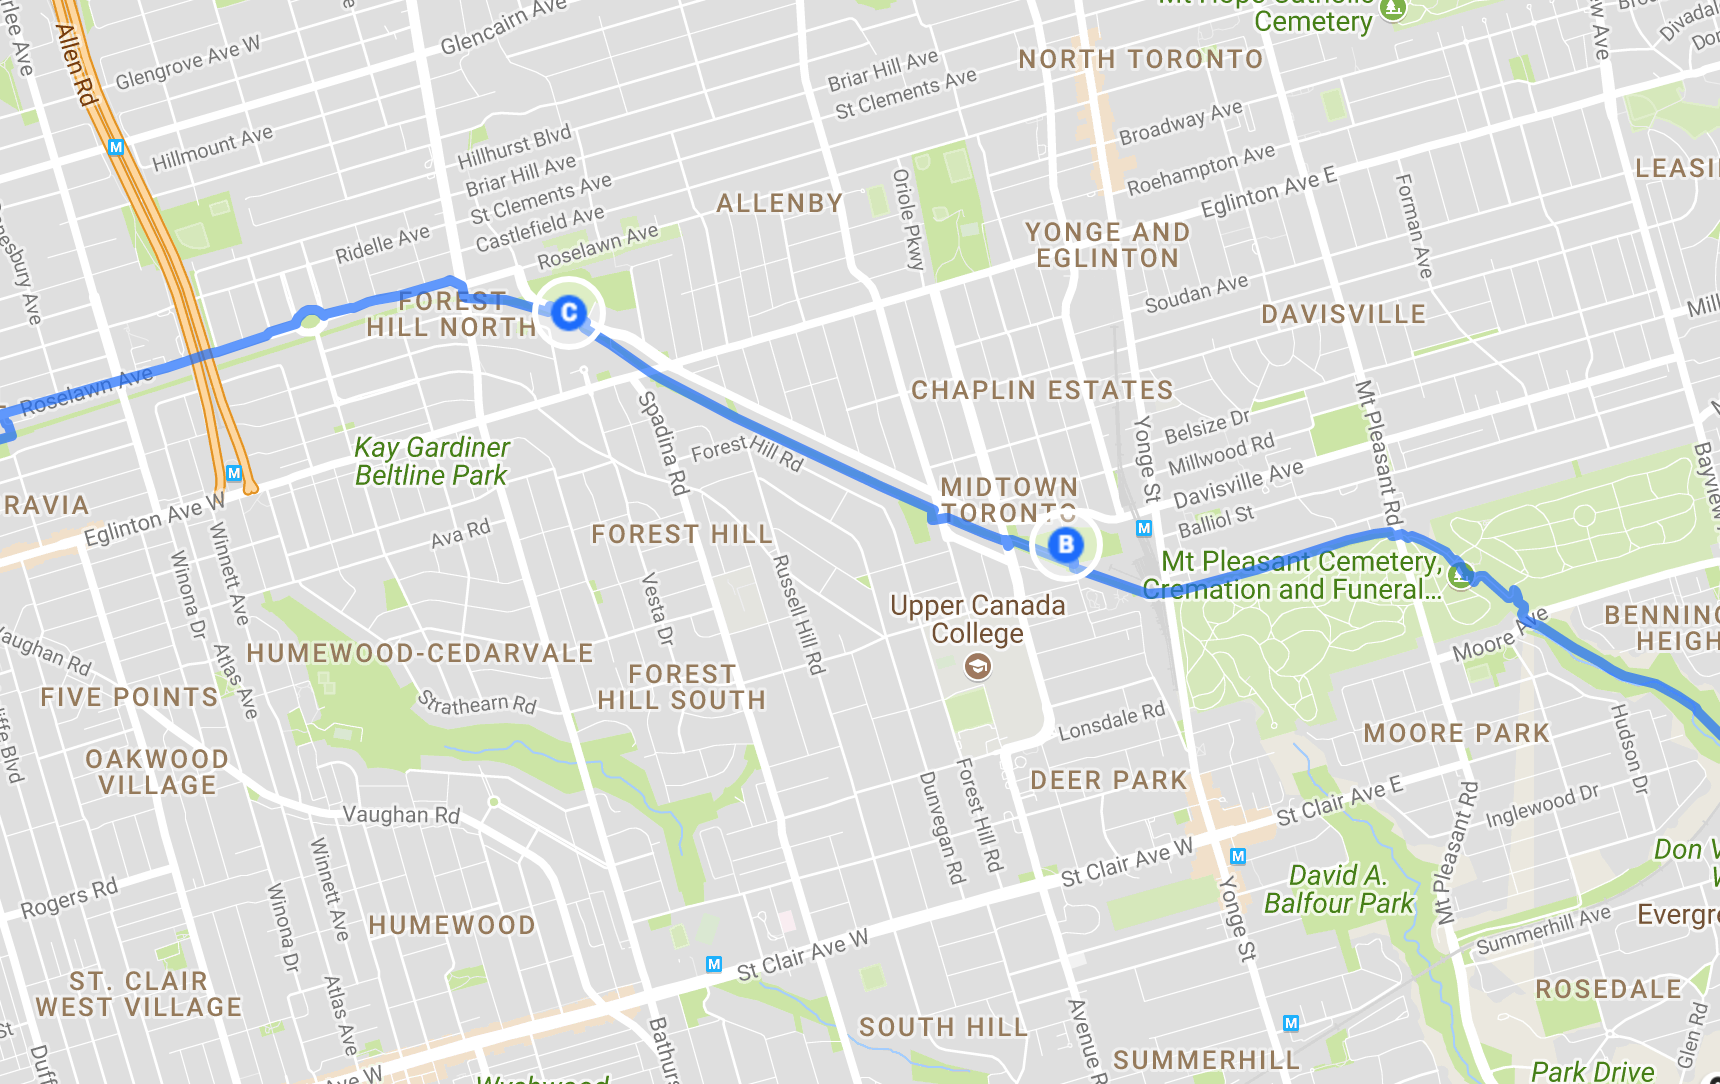 Map of route from Oriole Park to Memorial Park